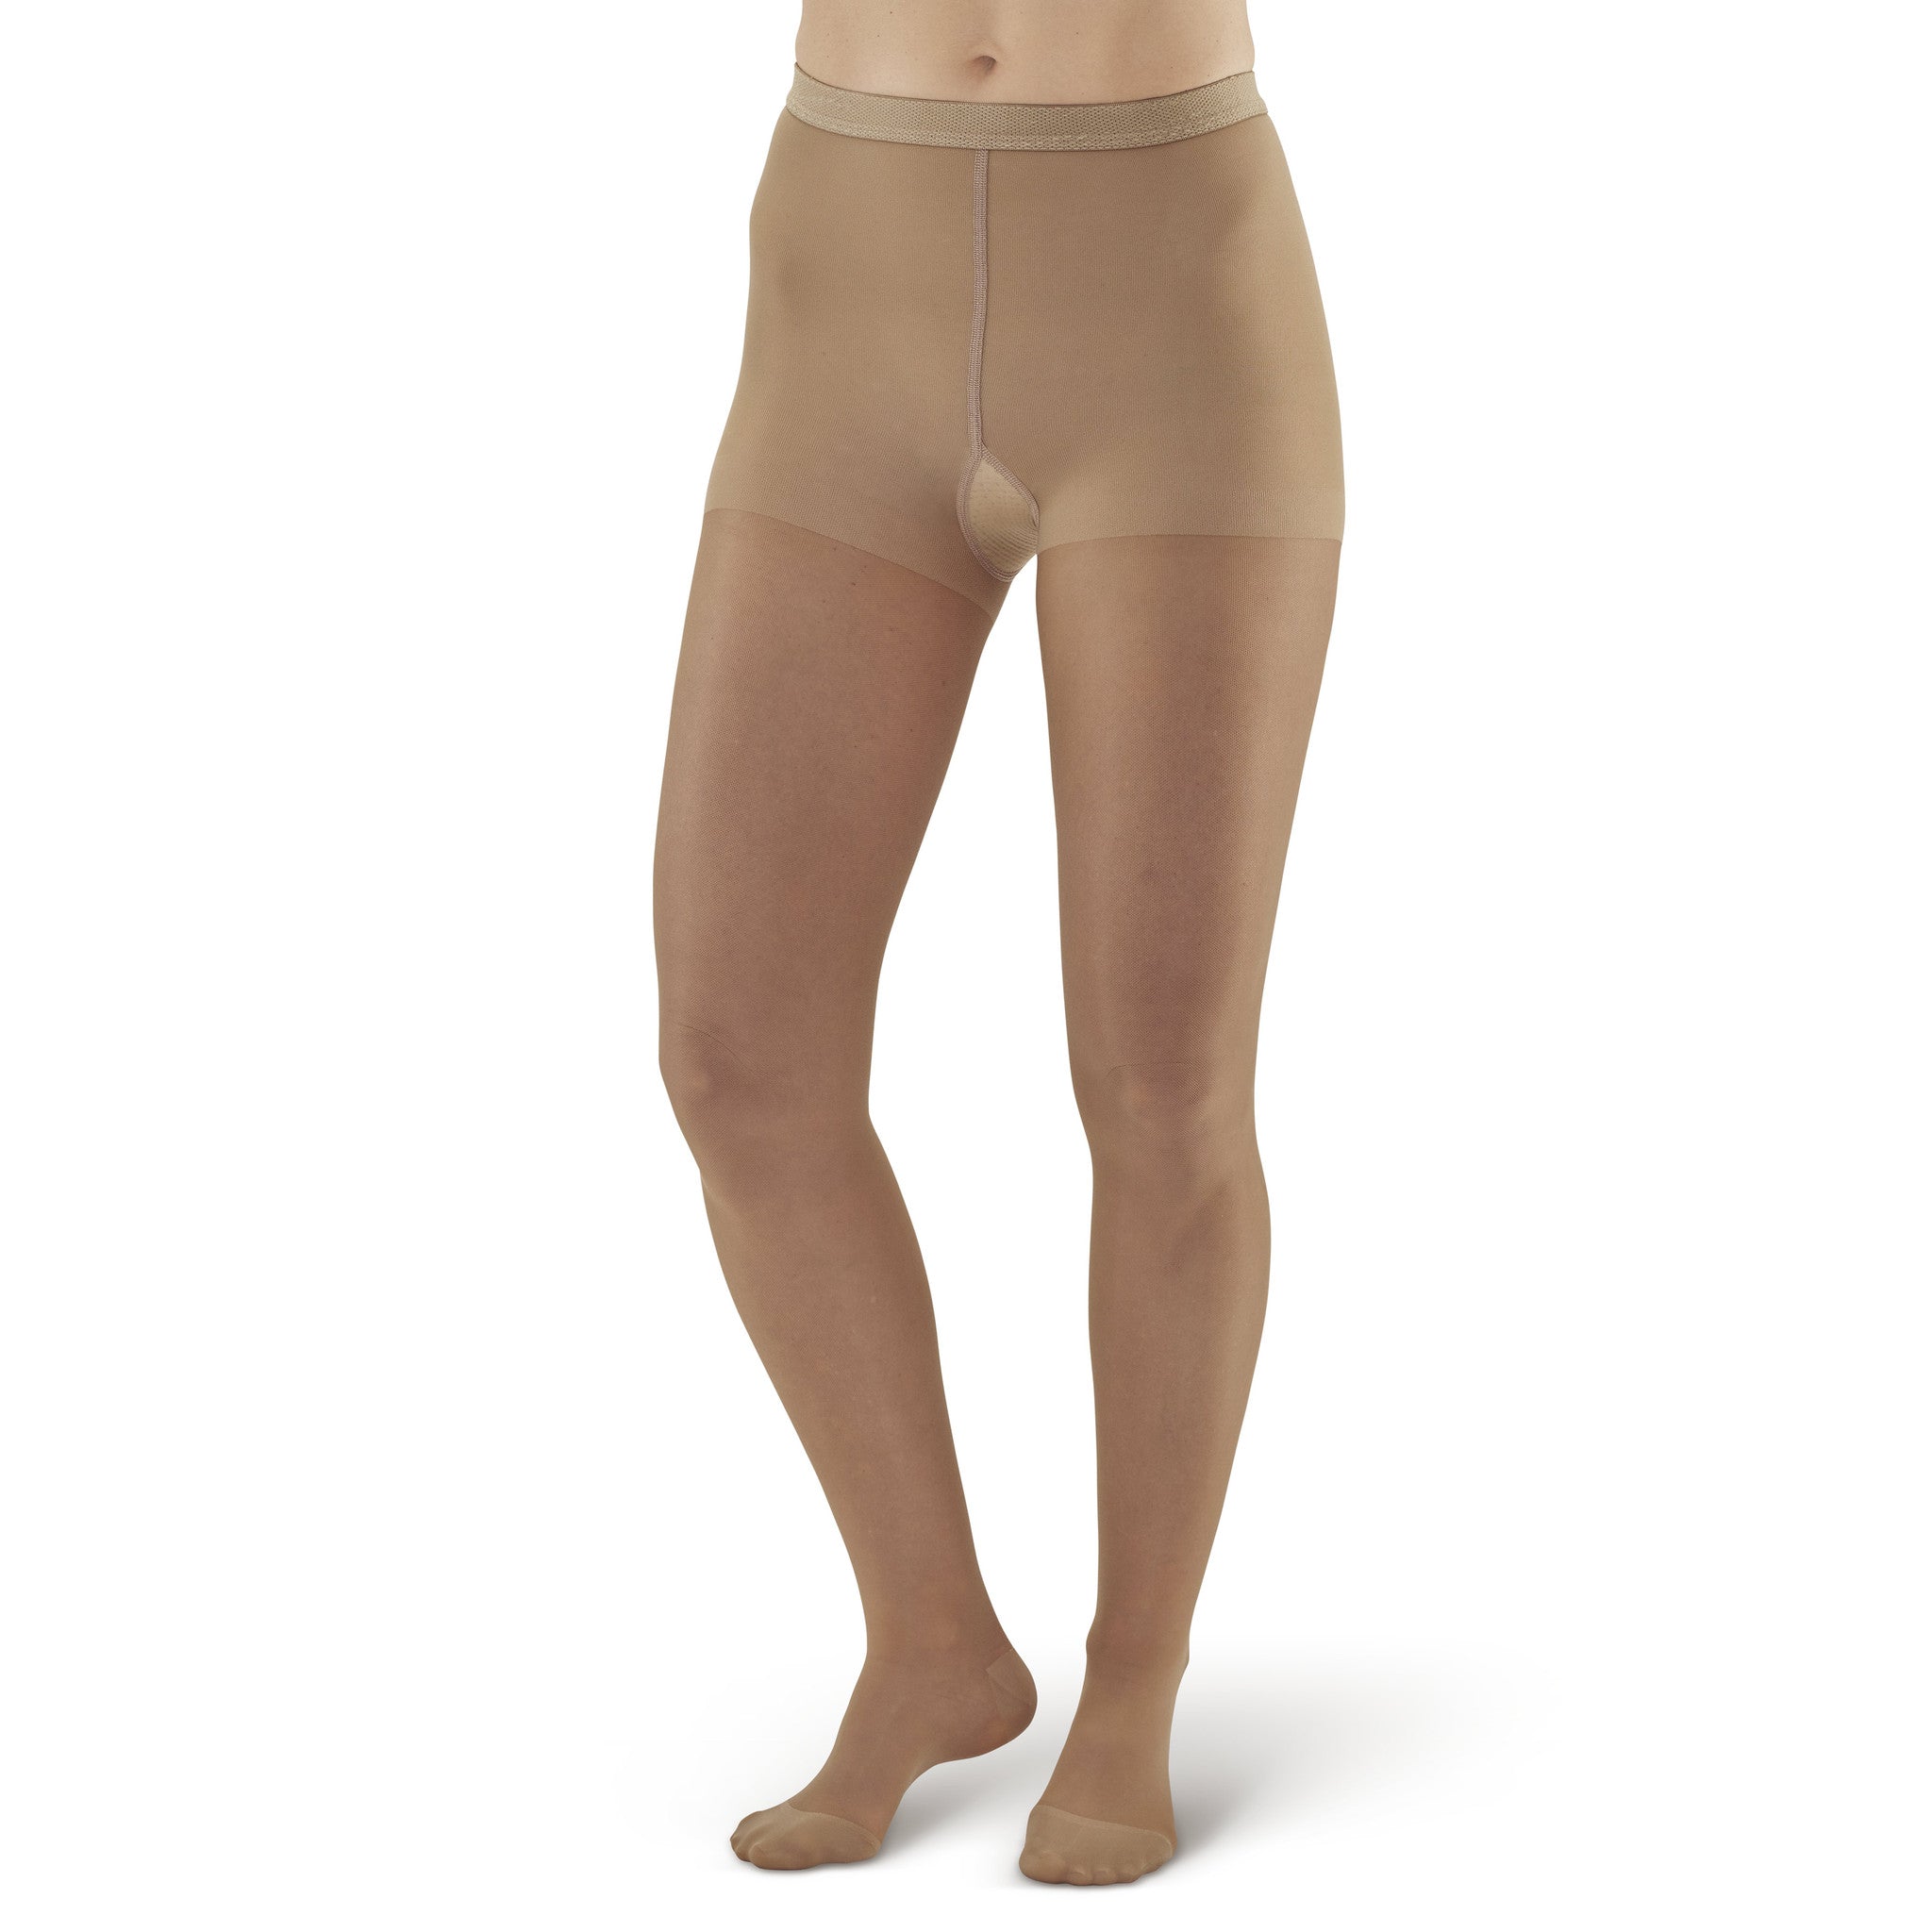 Sheer Support Hose, AW Style 33